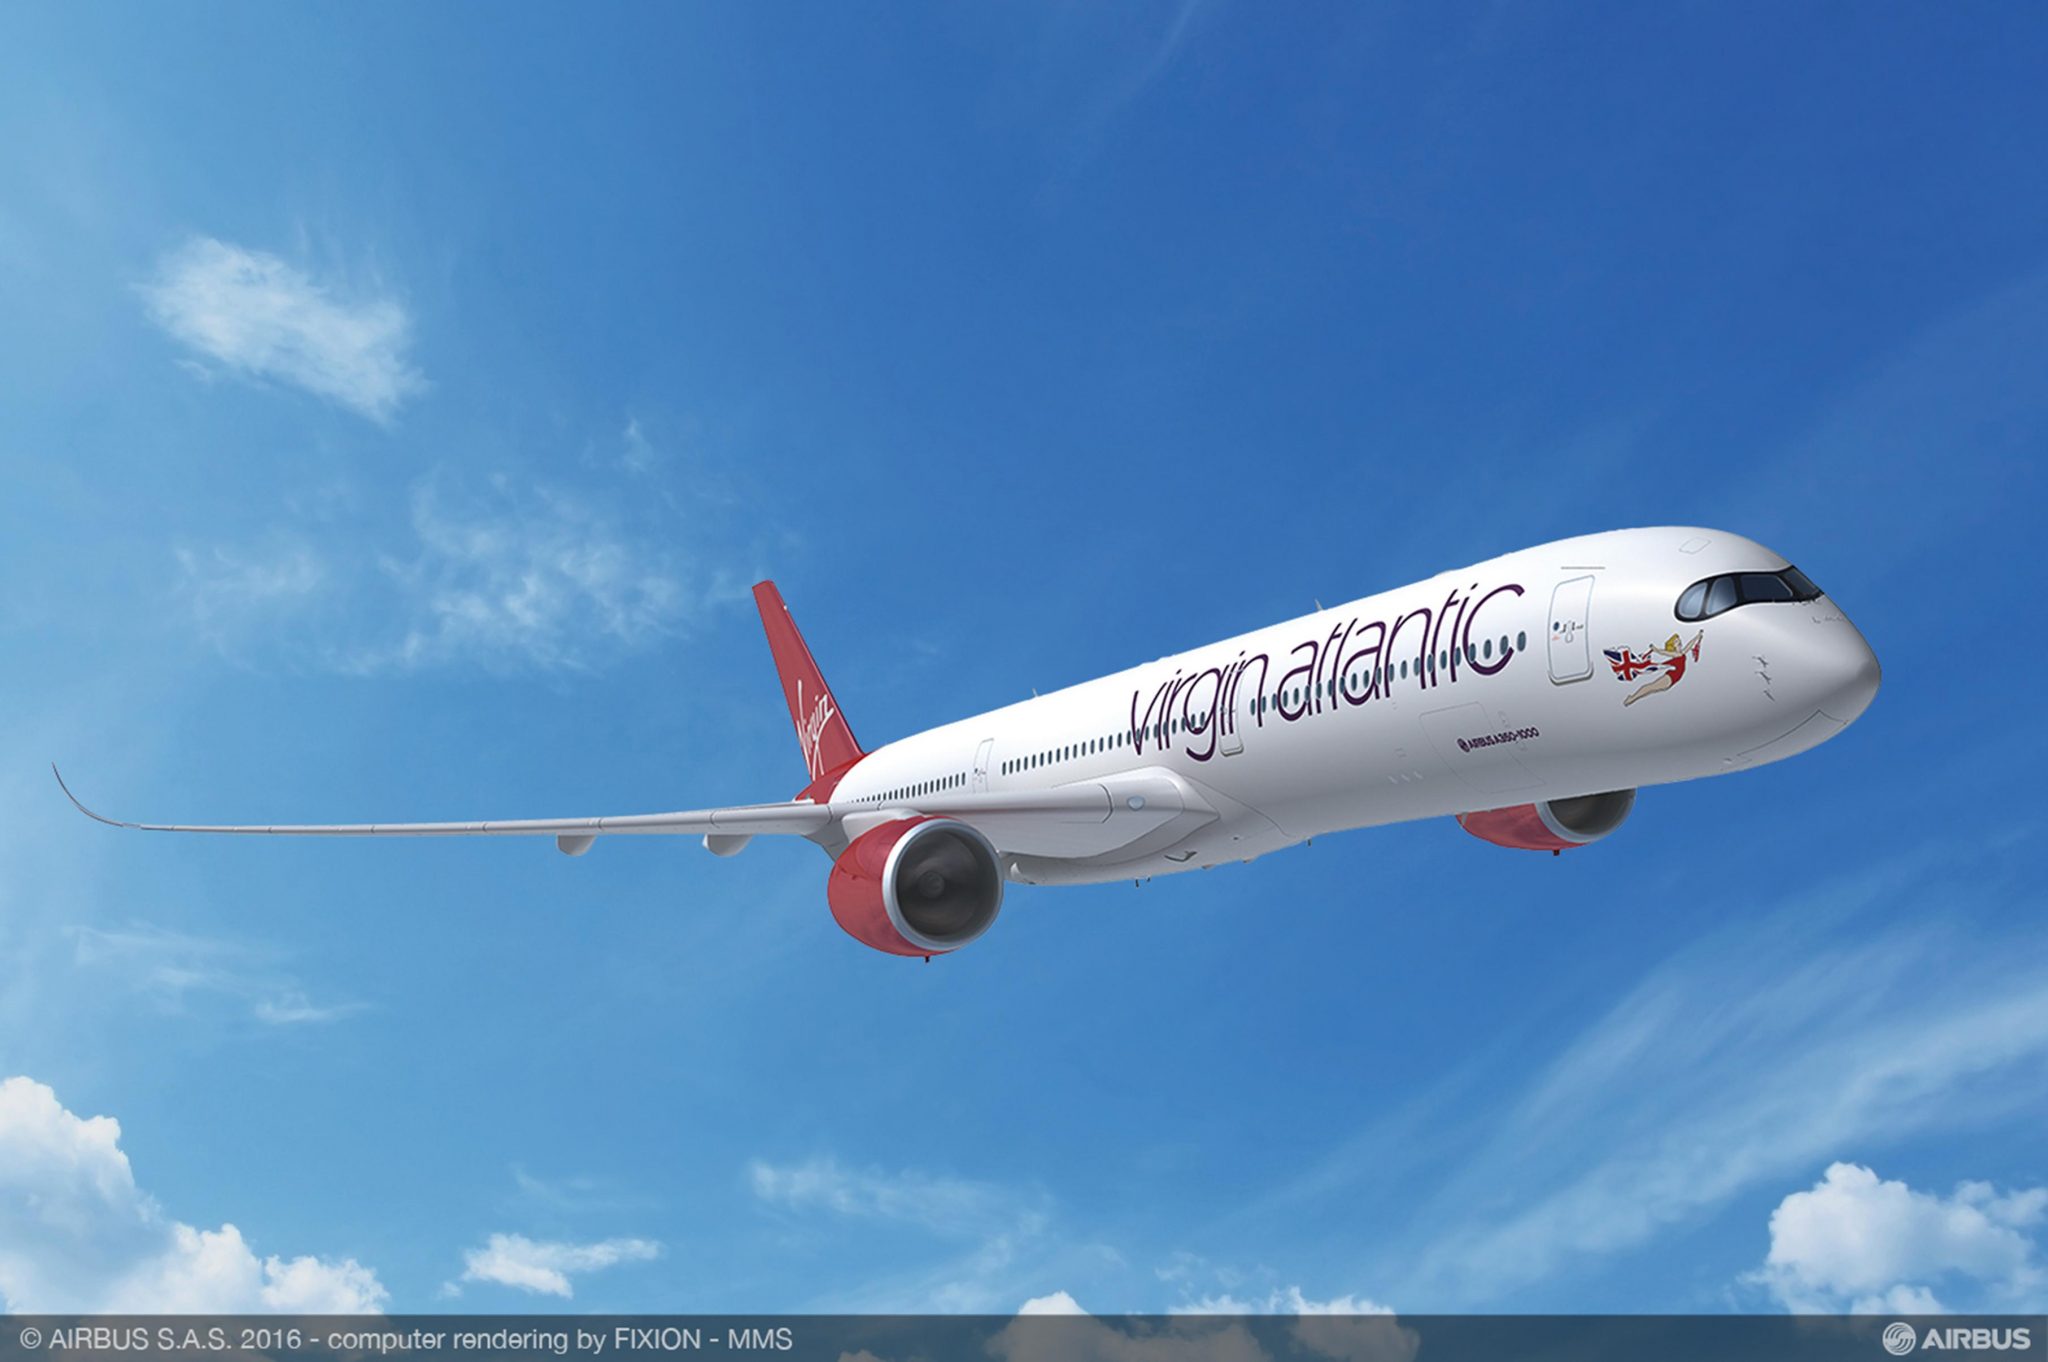 Virgin Atlantic launches new routes across three continents